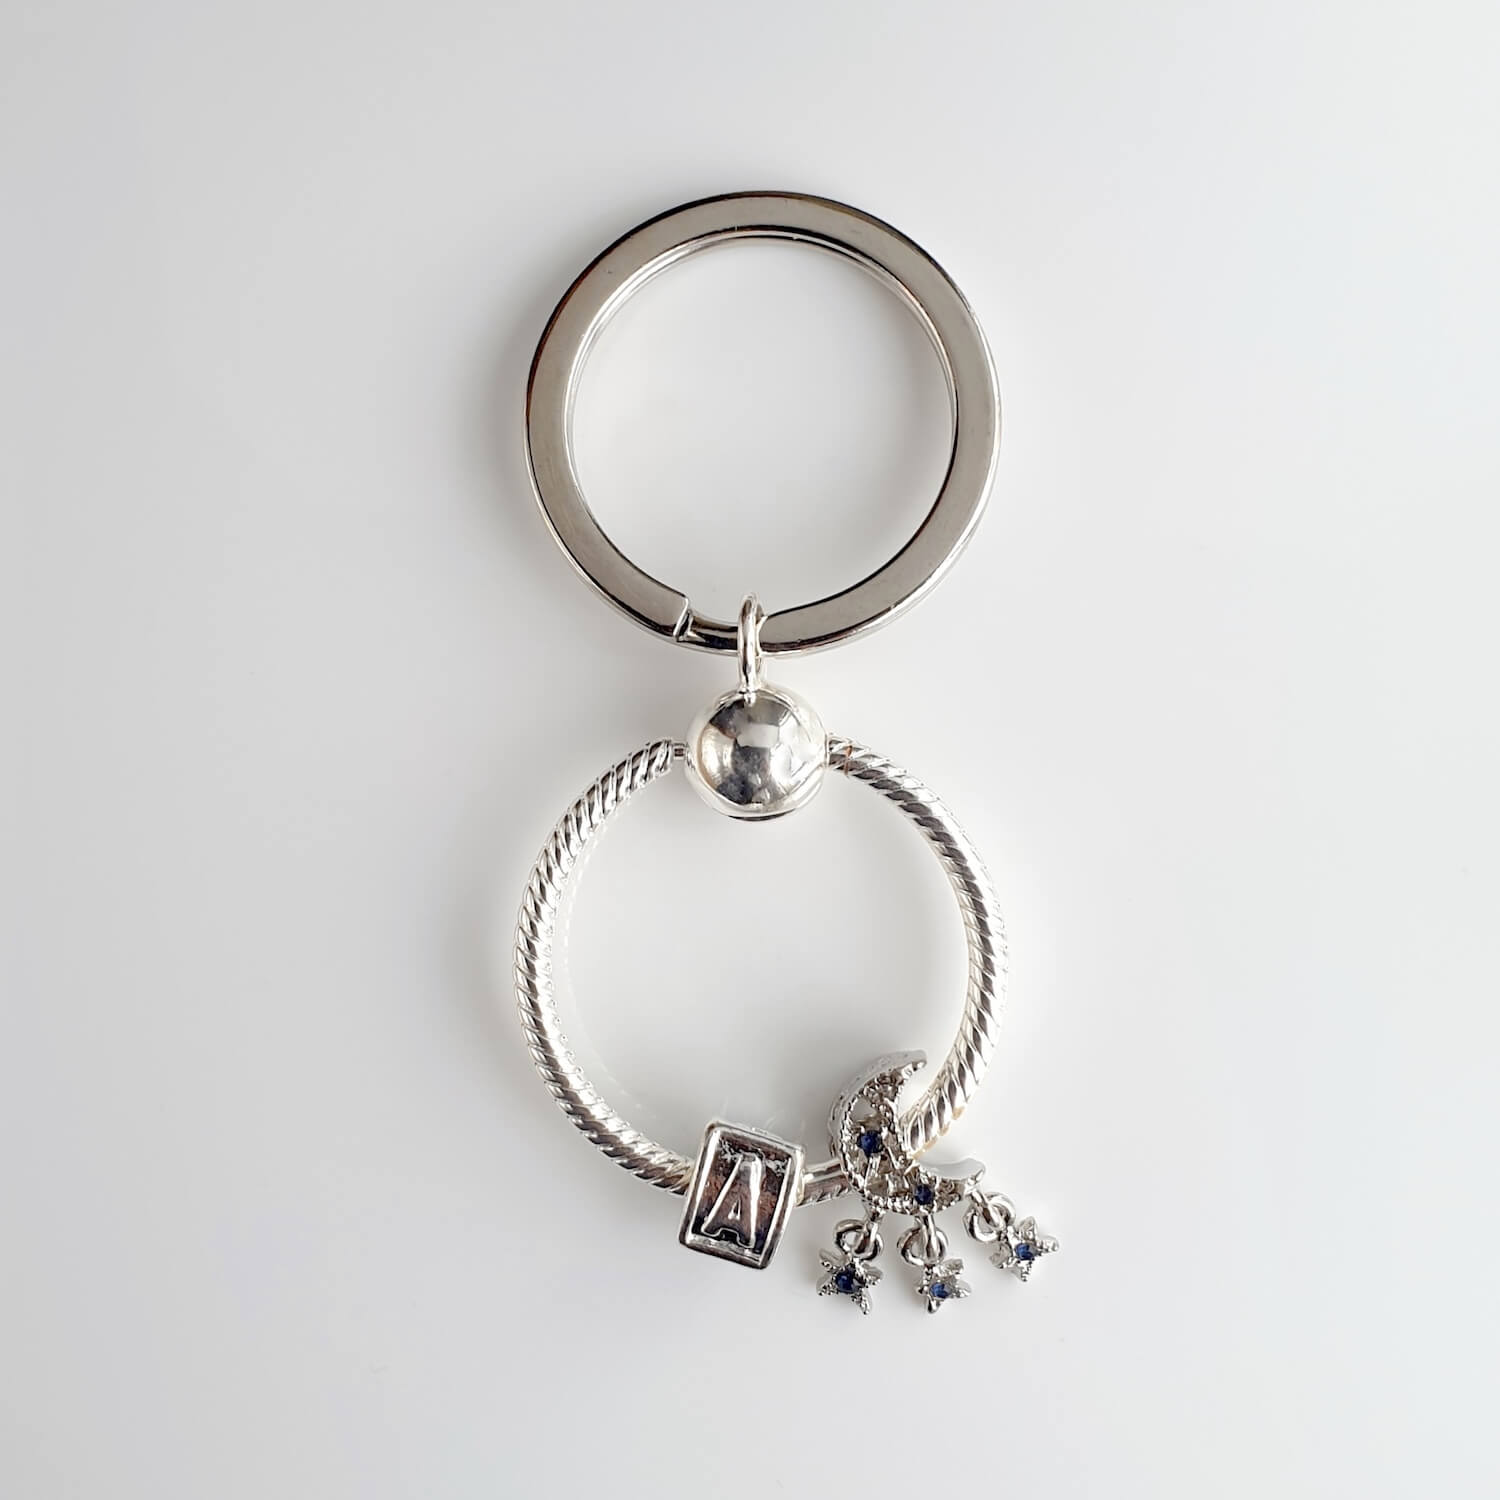 Crescent Moon Keyrings personalised with Custom Initial Letter Charm